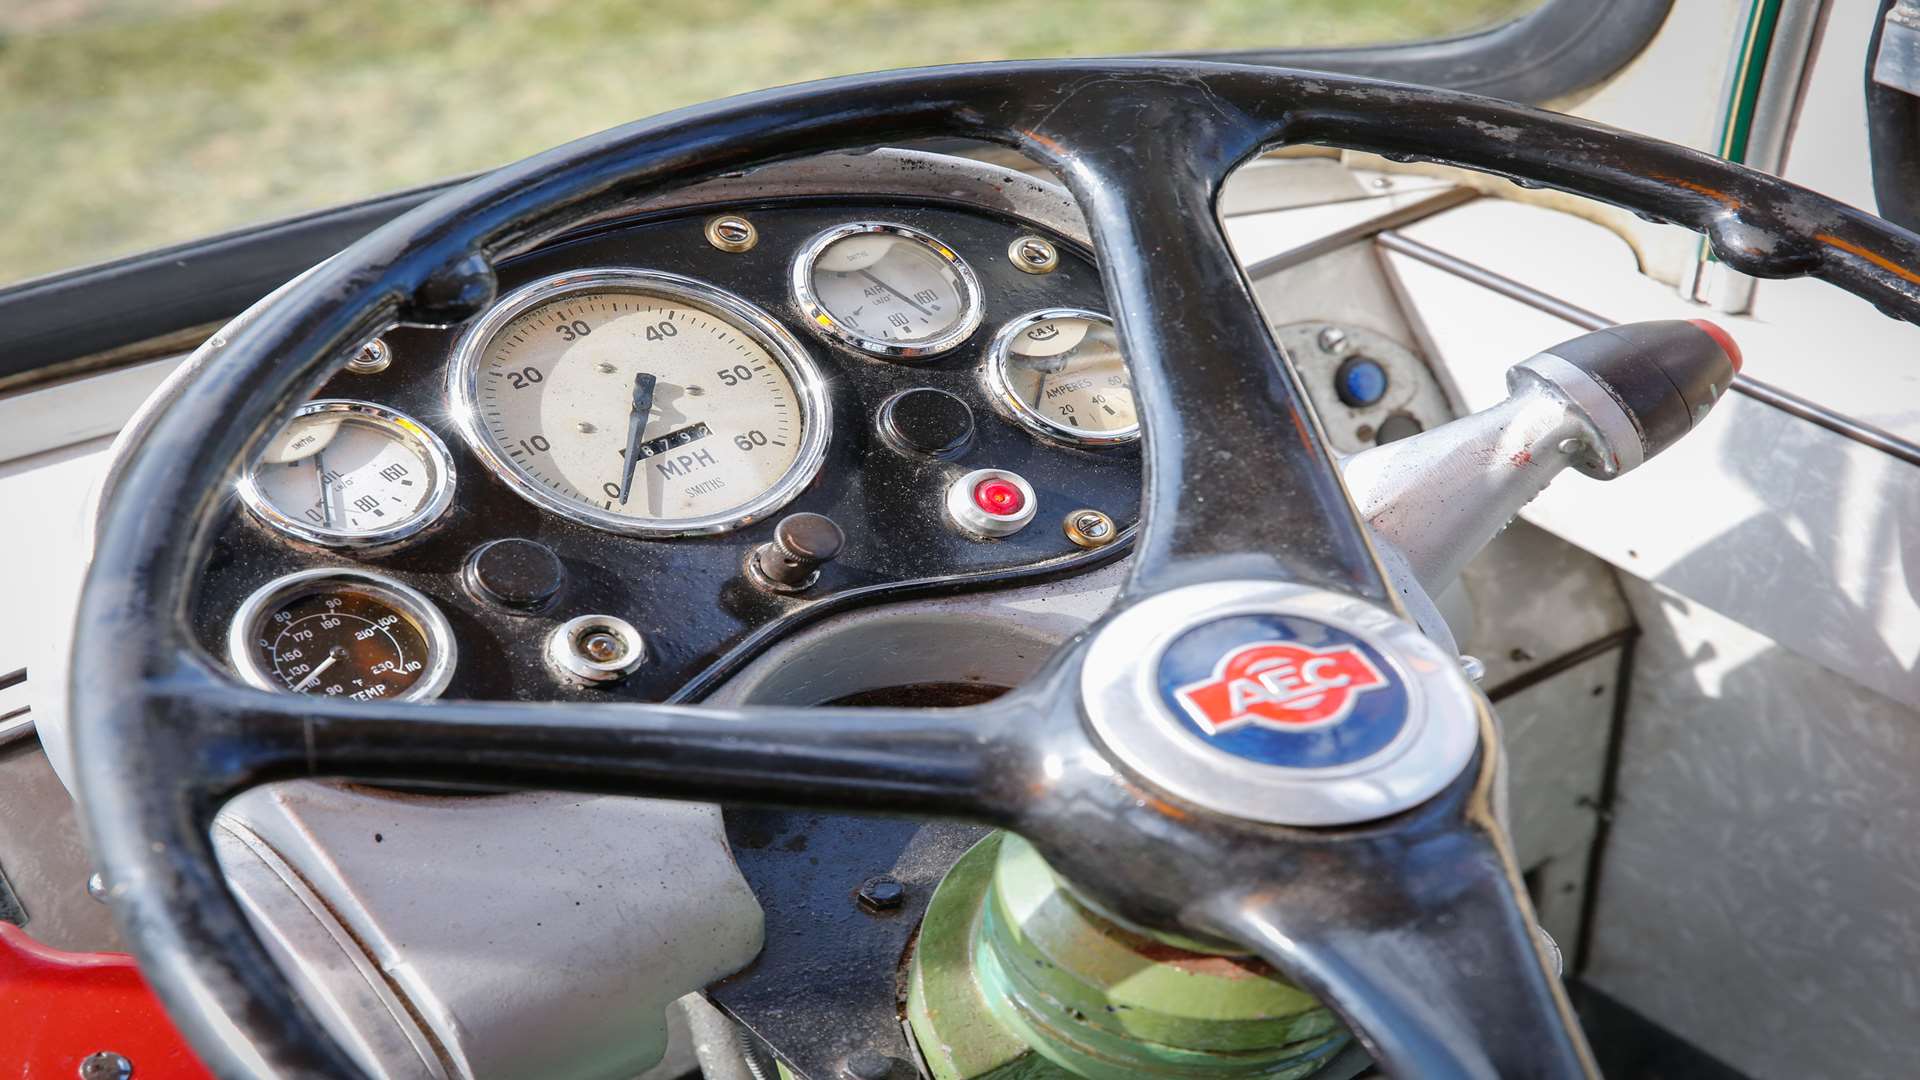 Let the Heritage Transport Show take the wheel this weekend at the Kent Showground, Detling